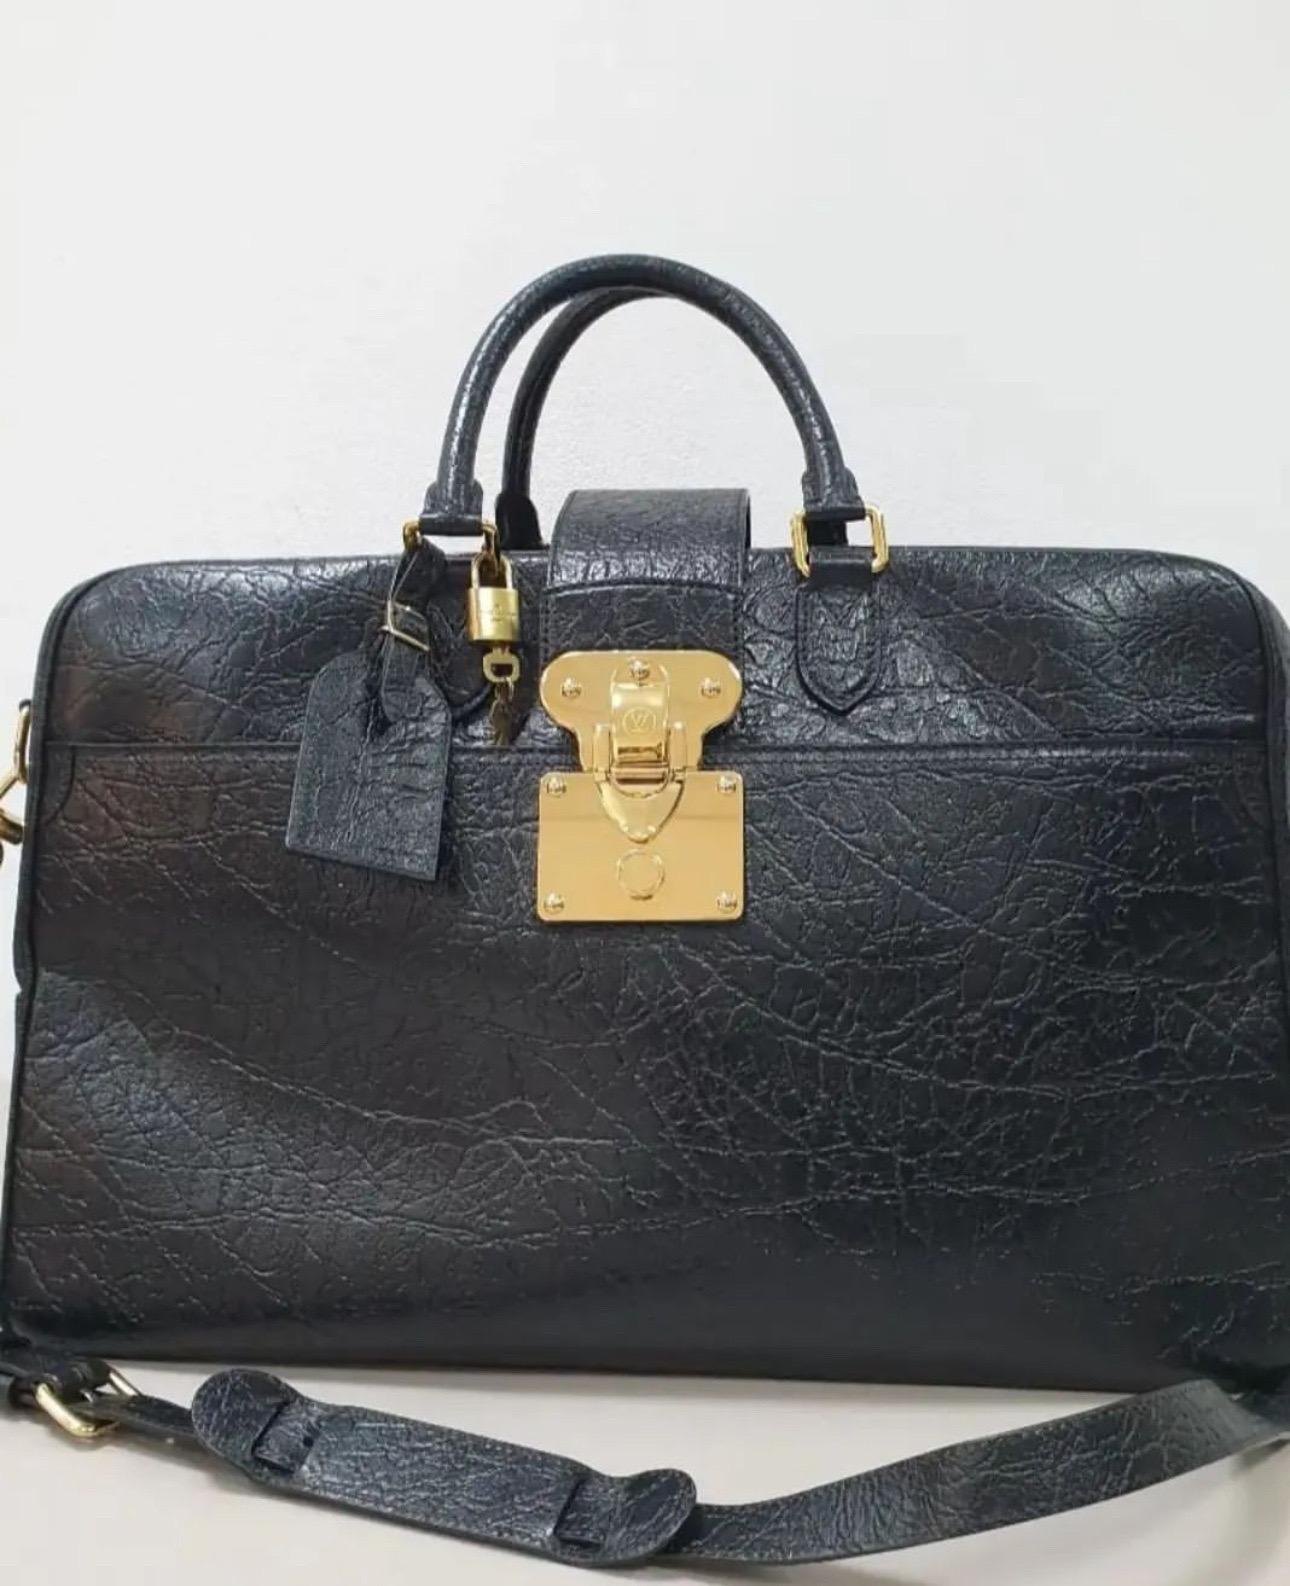 LOUIS VUITTON Calfskin Duffle Bag in Black. 
This stylish bag is crafted of calfskin leather in black. 
It features a top lock, polished brass hardware, a short top handle strap, and an optional shoulder strap.

Height: 13.39 in (34 cm)Width: 9.45